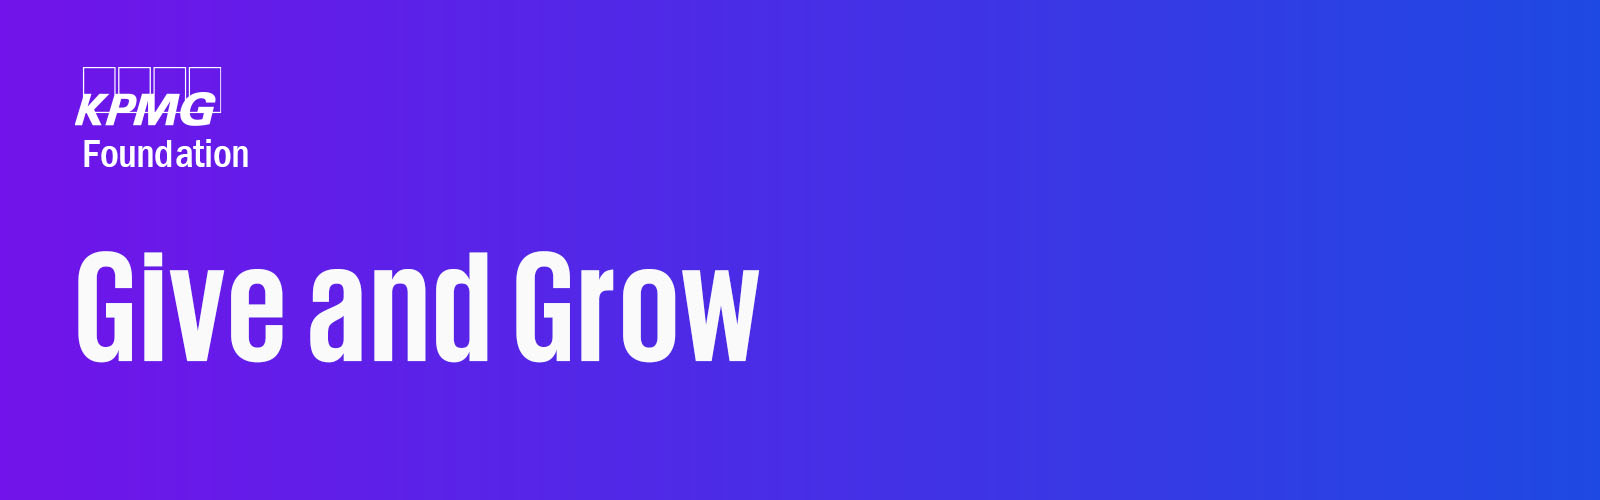 KPMG Foundation - Give and Grow